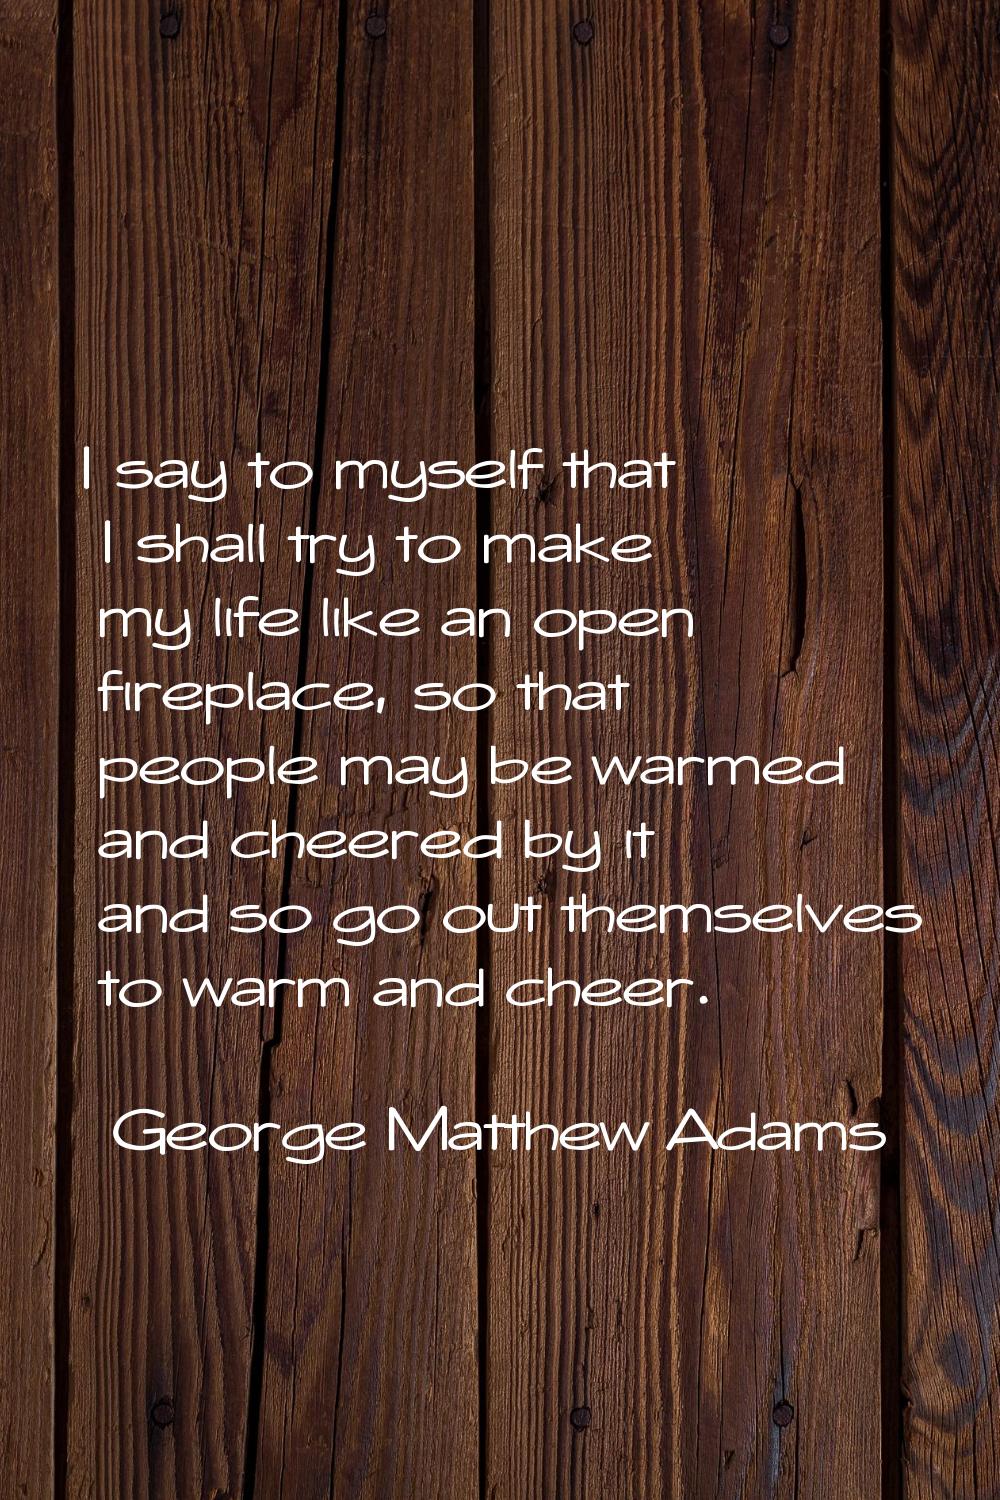 I say to myself that I shall try to make my life like an open fireplace, so that people may be warm